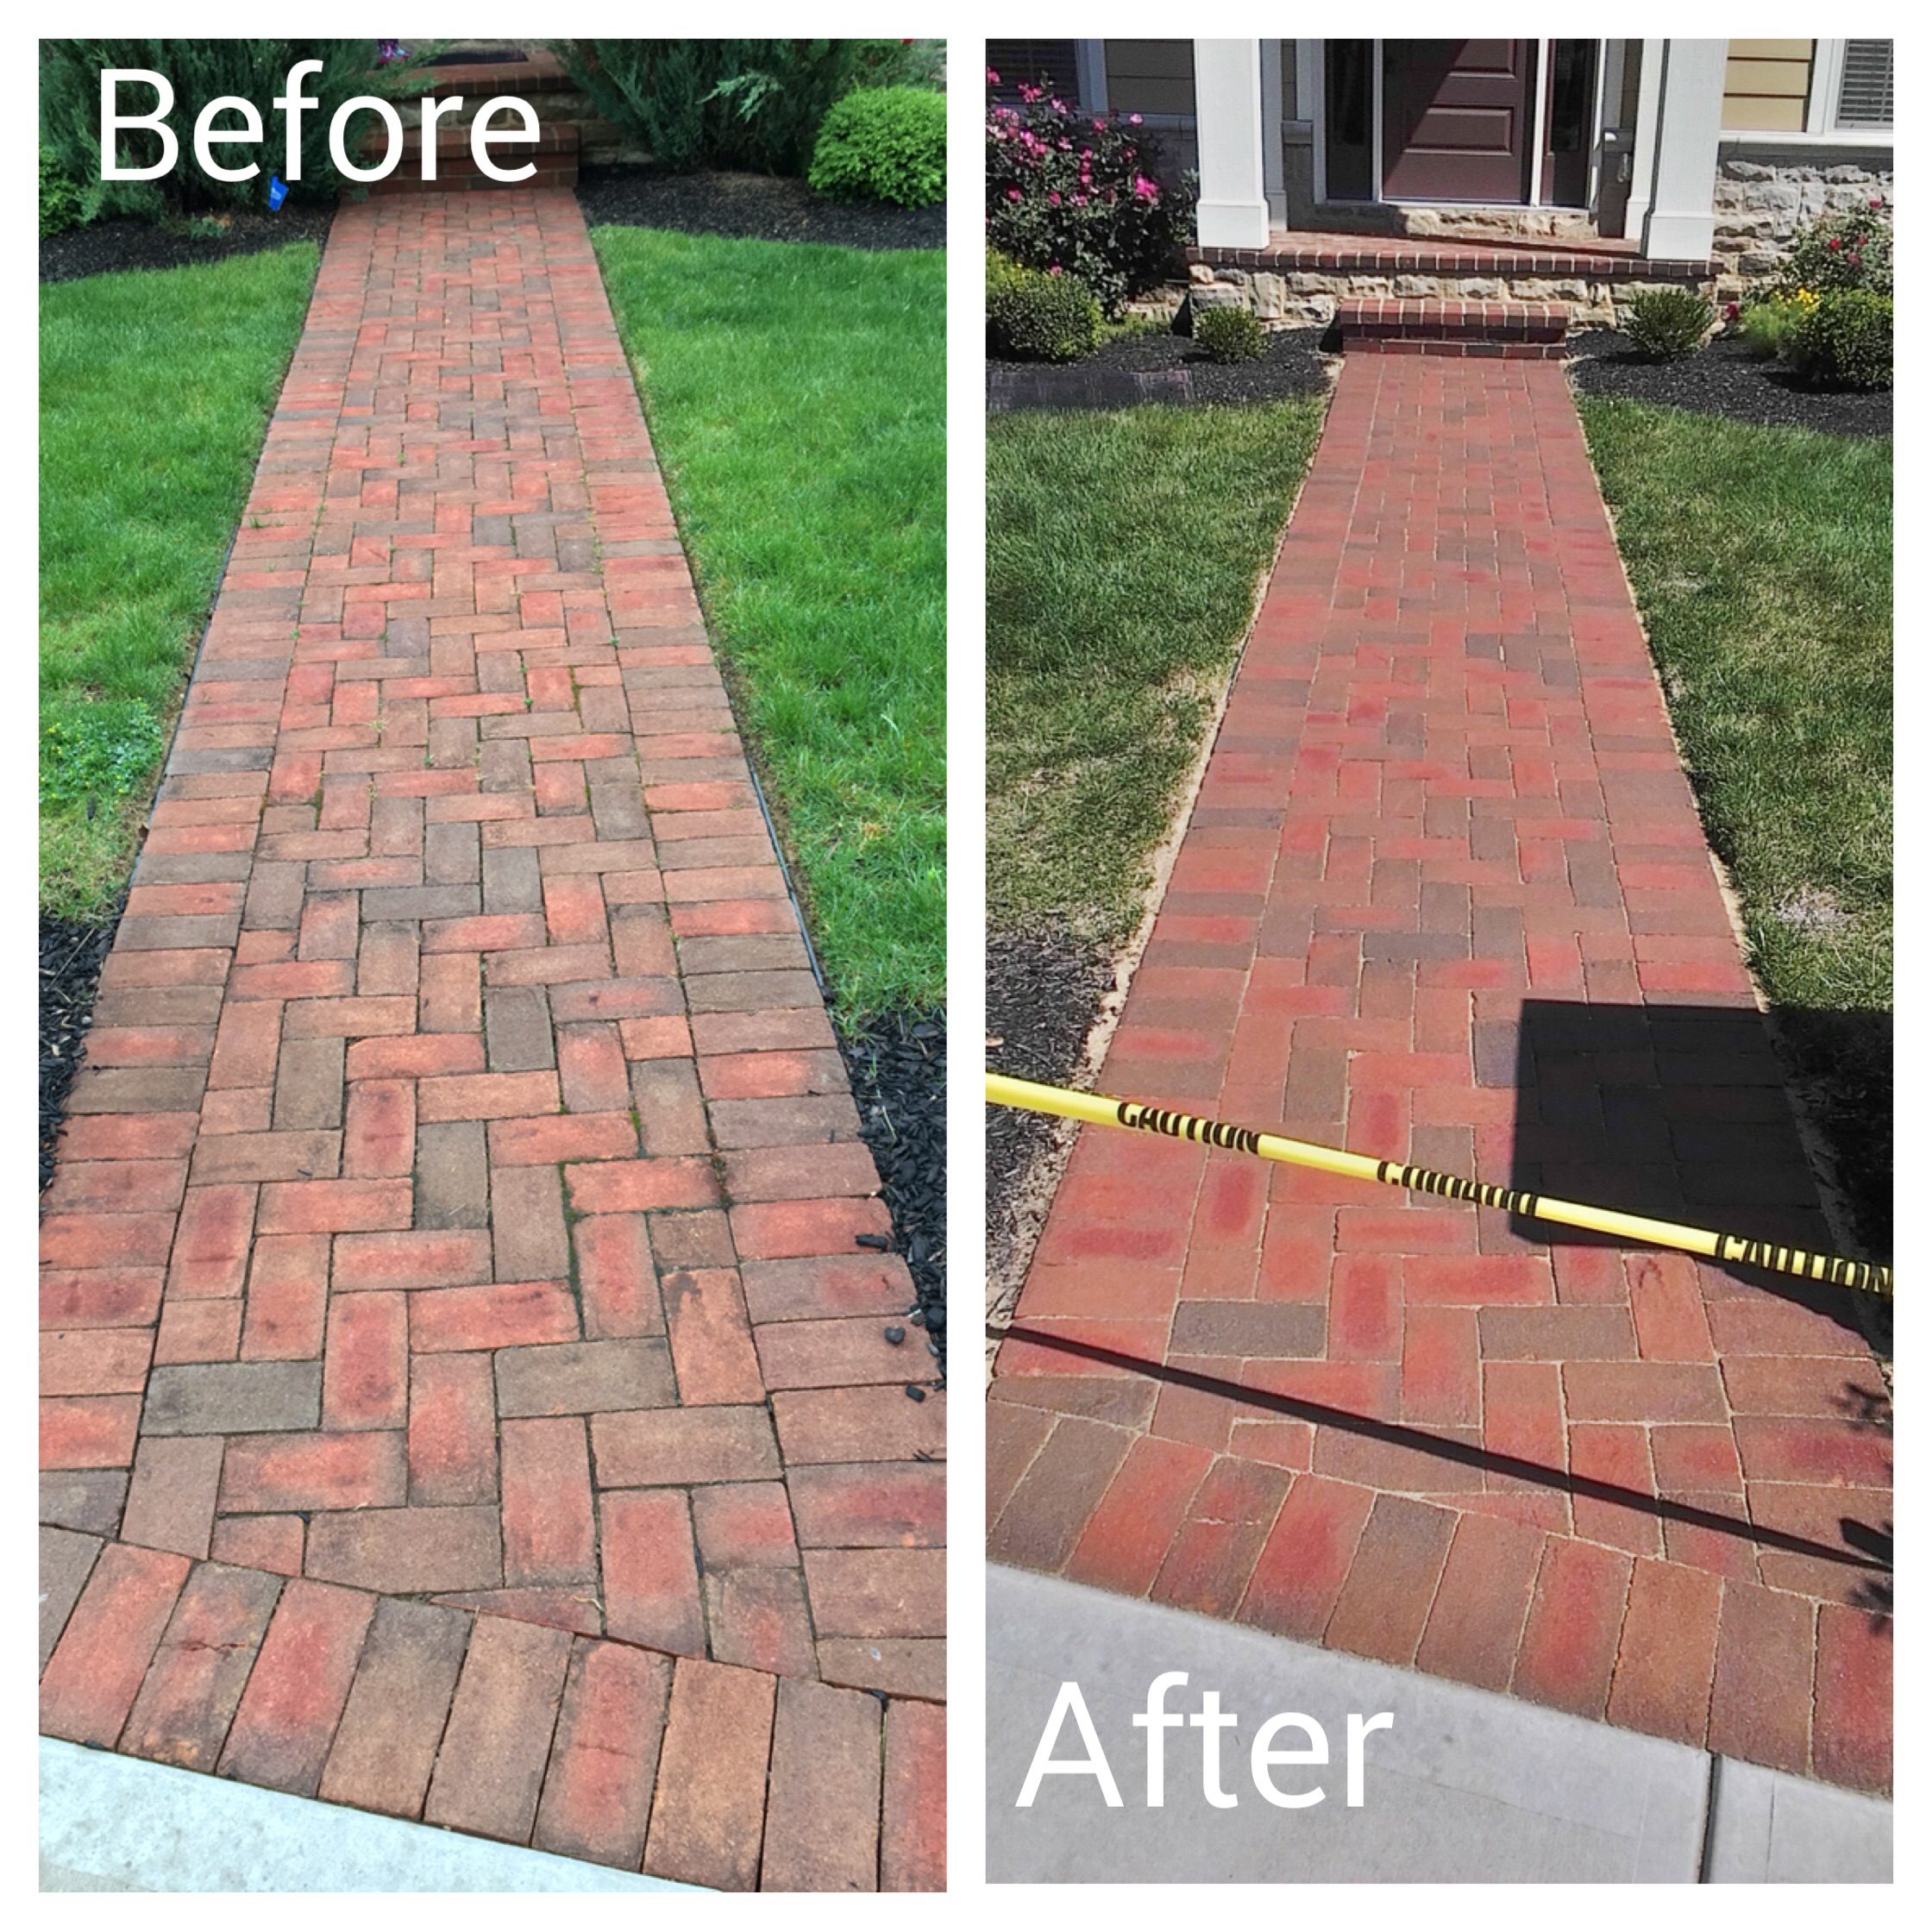 Paver Cleaning and Paver Sealing Boynton Beach, FL